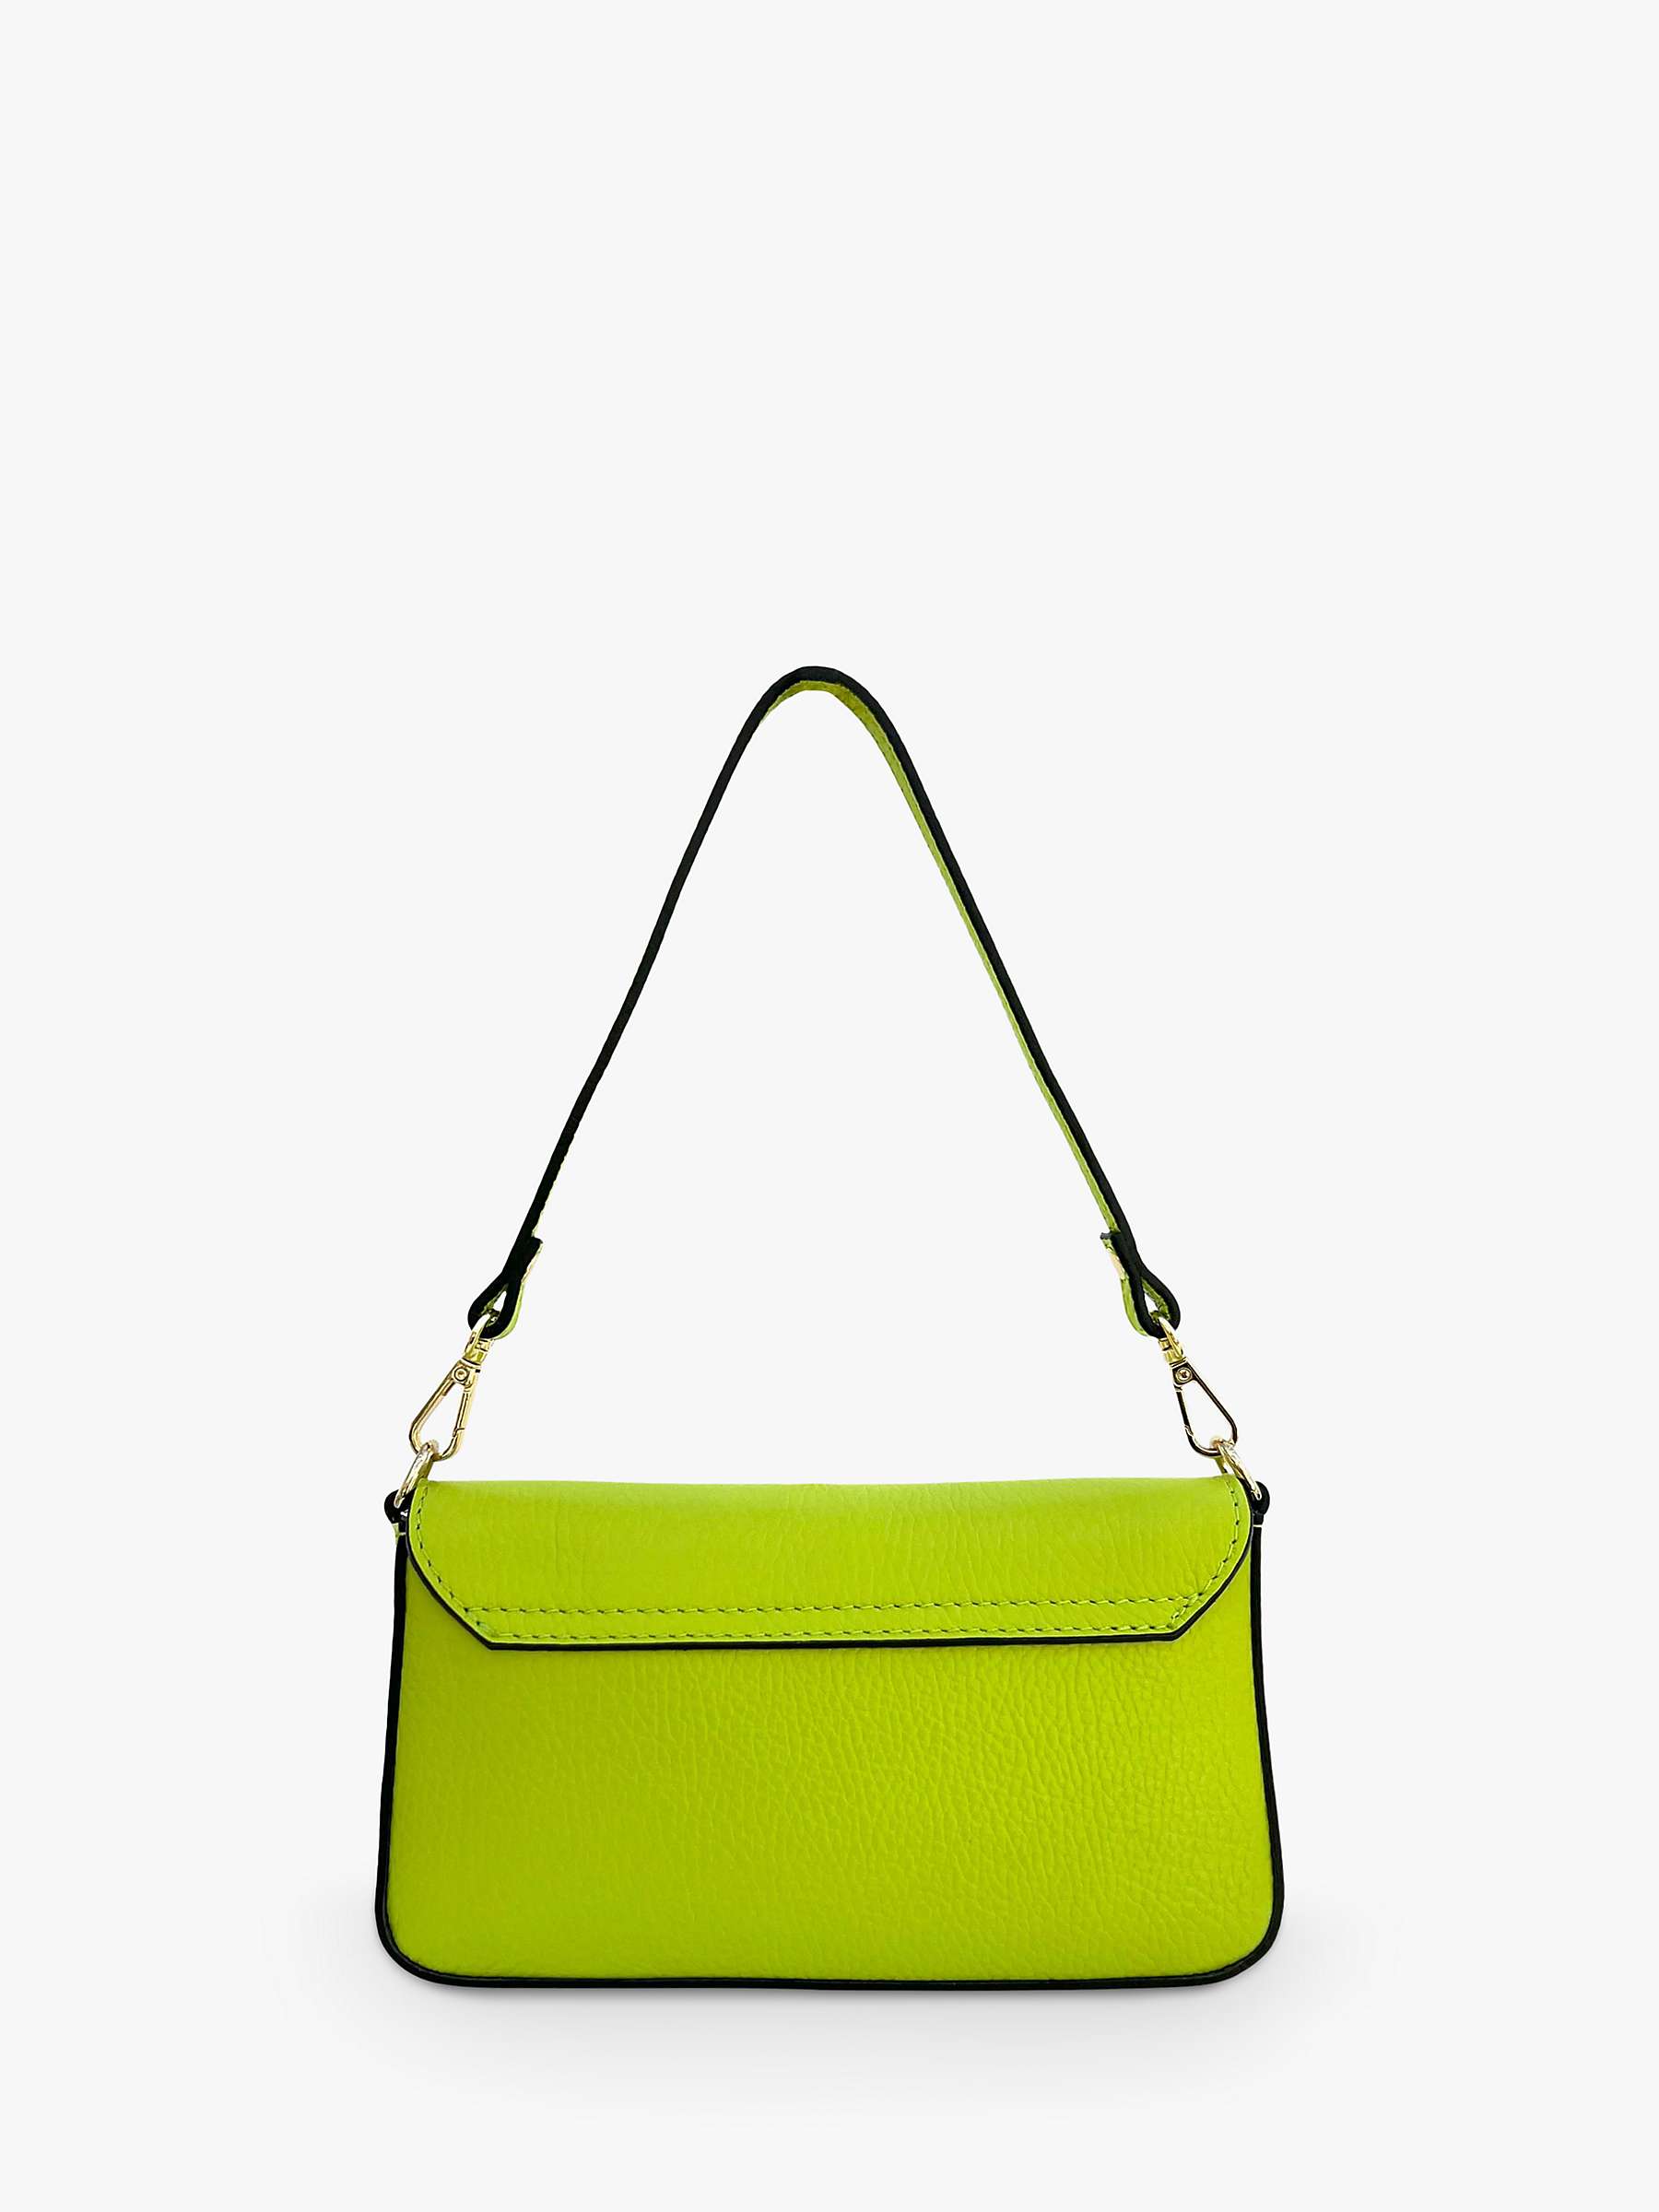 Buy Apatchy The Munro Leather Shoulder Bag Online at johnlewis.com